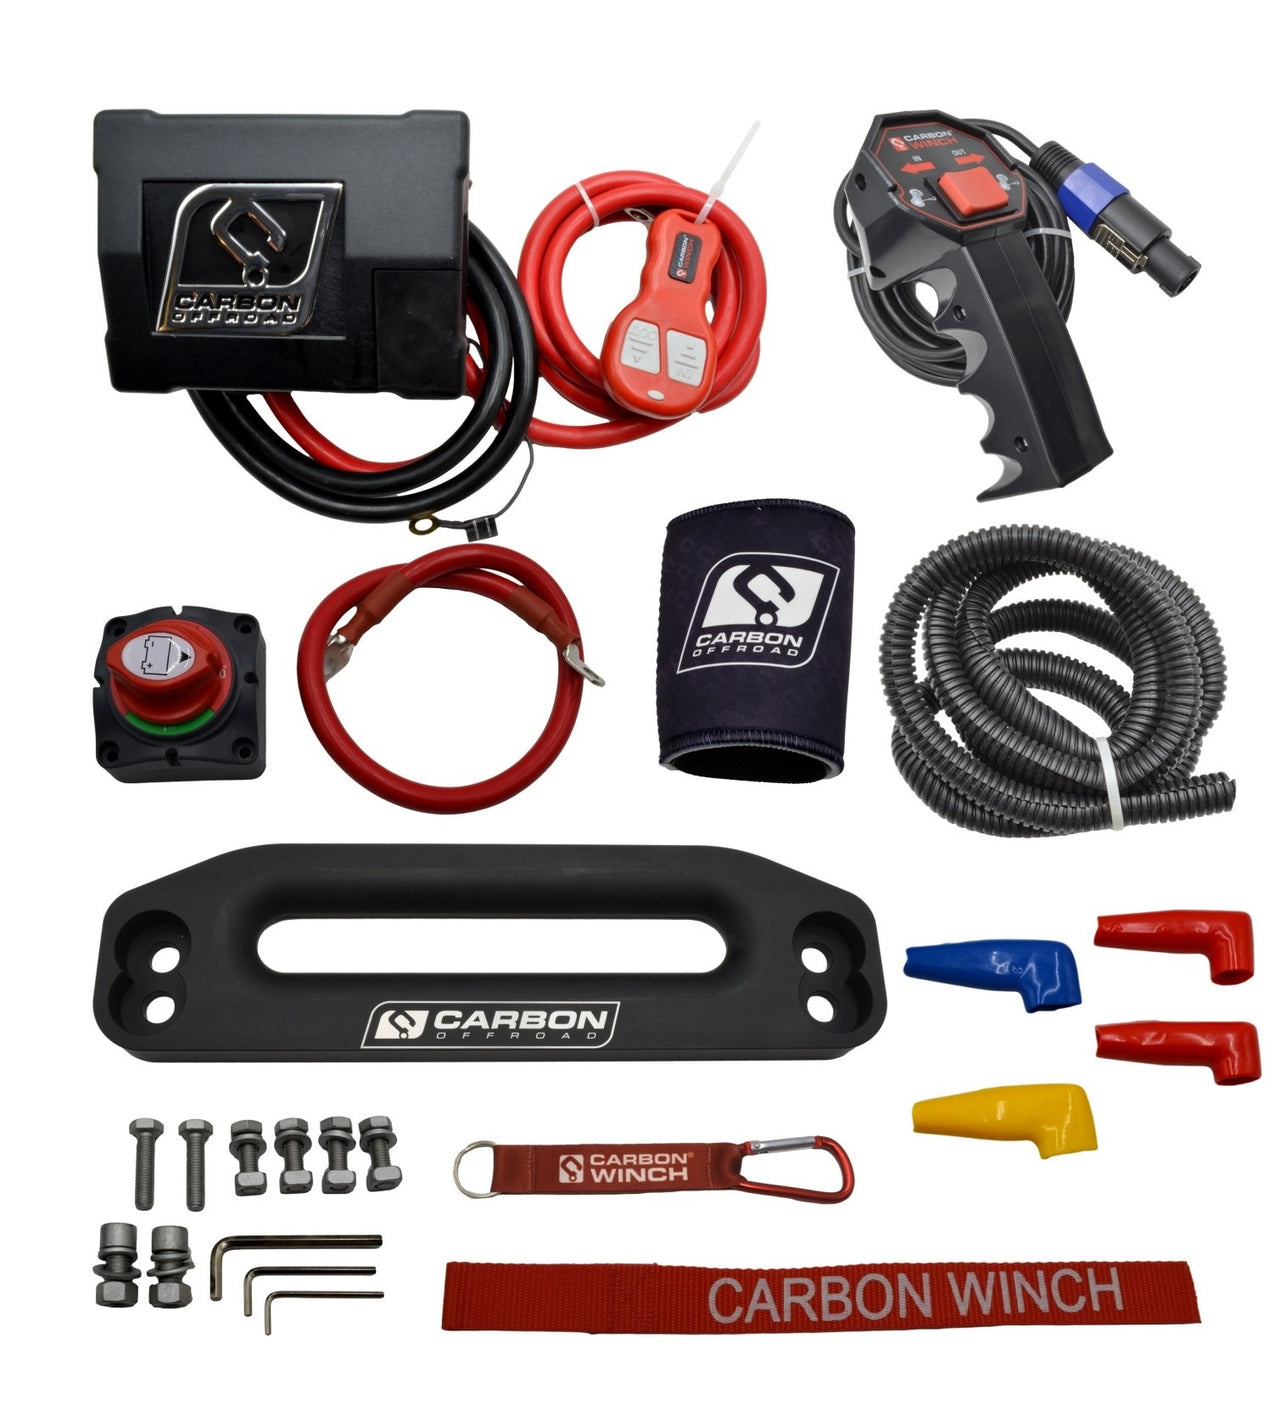 Carbon 12K - 12000lb Winch With Red Hook V3